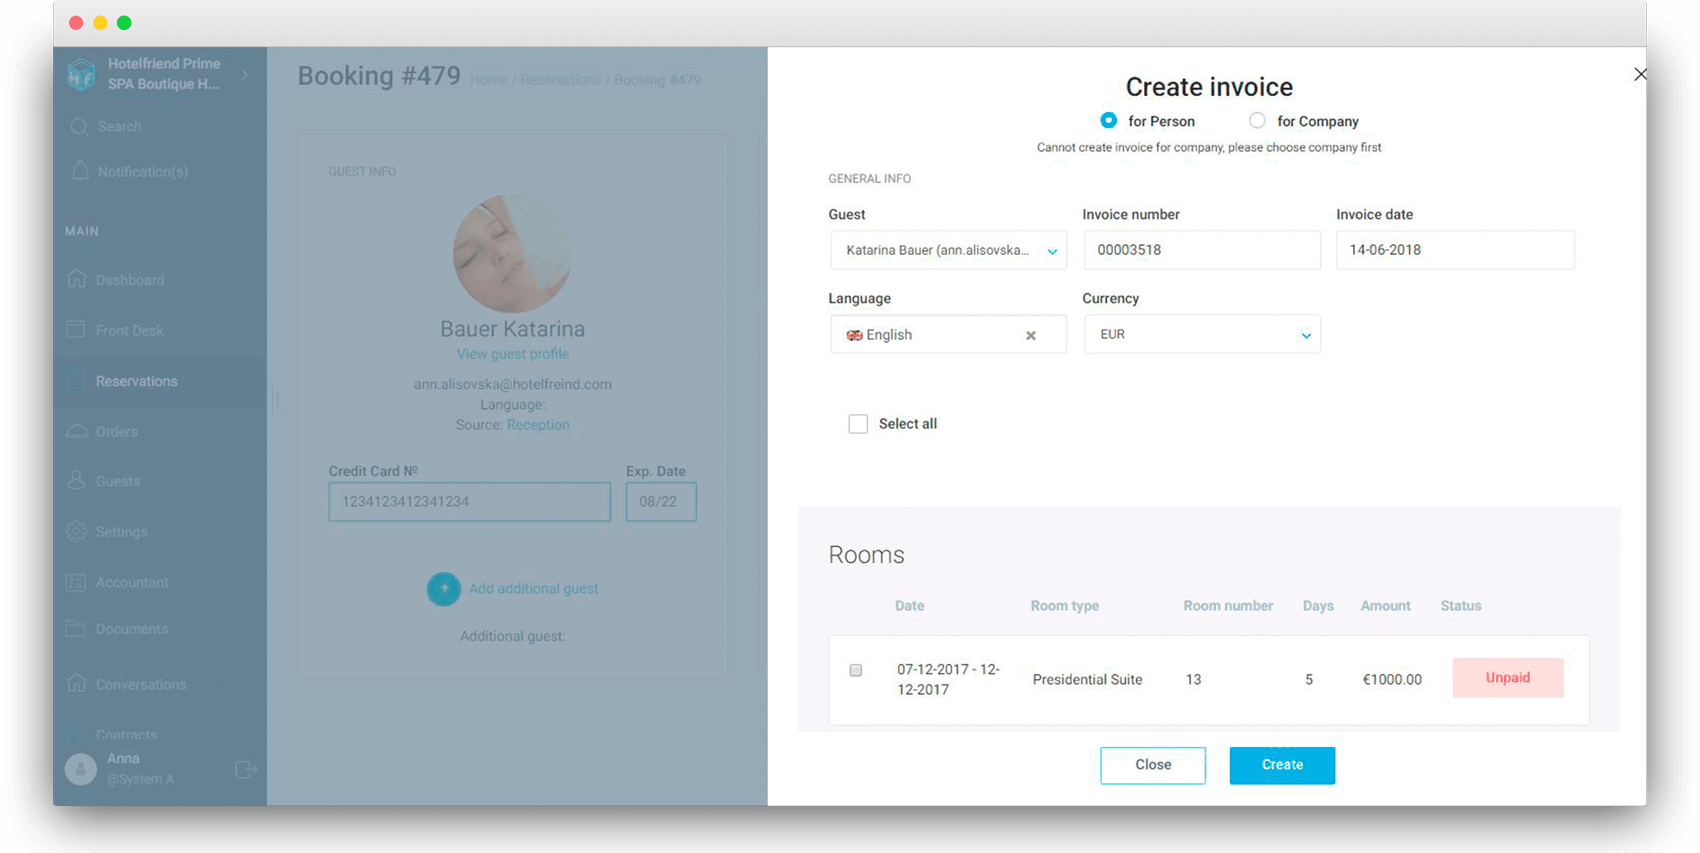 New design of creating the invoice